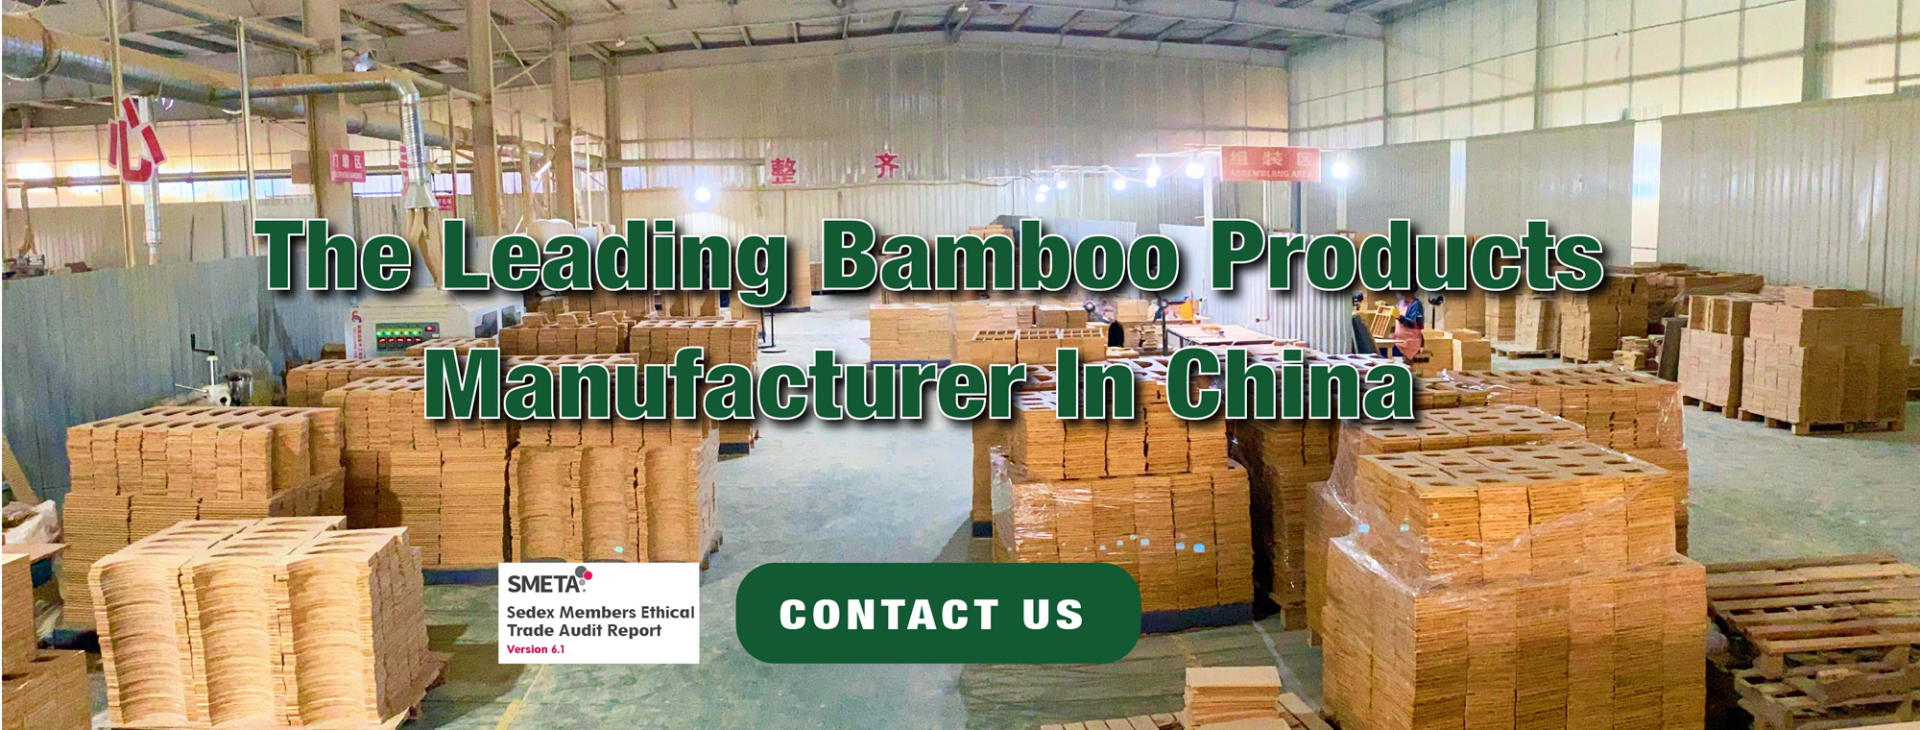 The Leading Bamboo Products Miamufacturer In China
